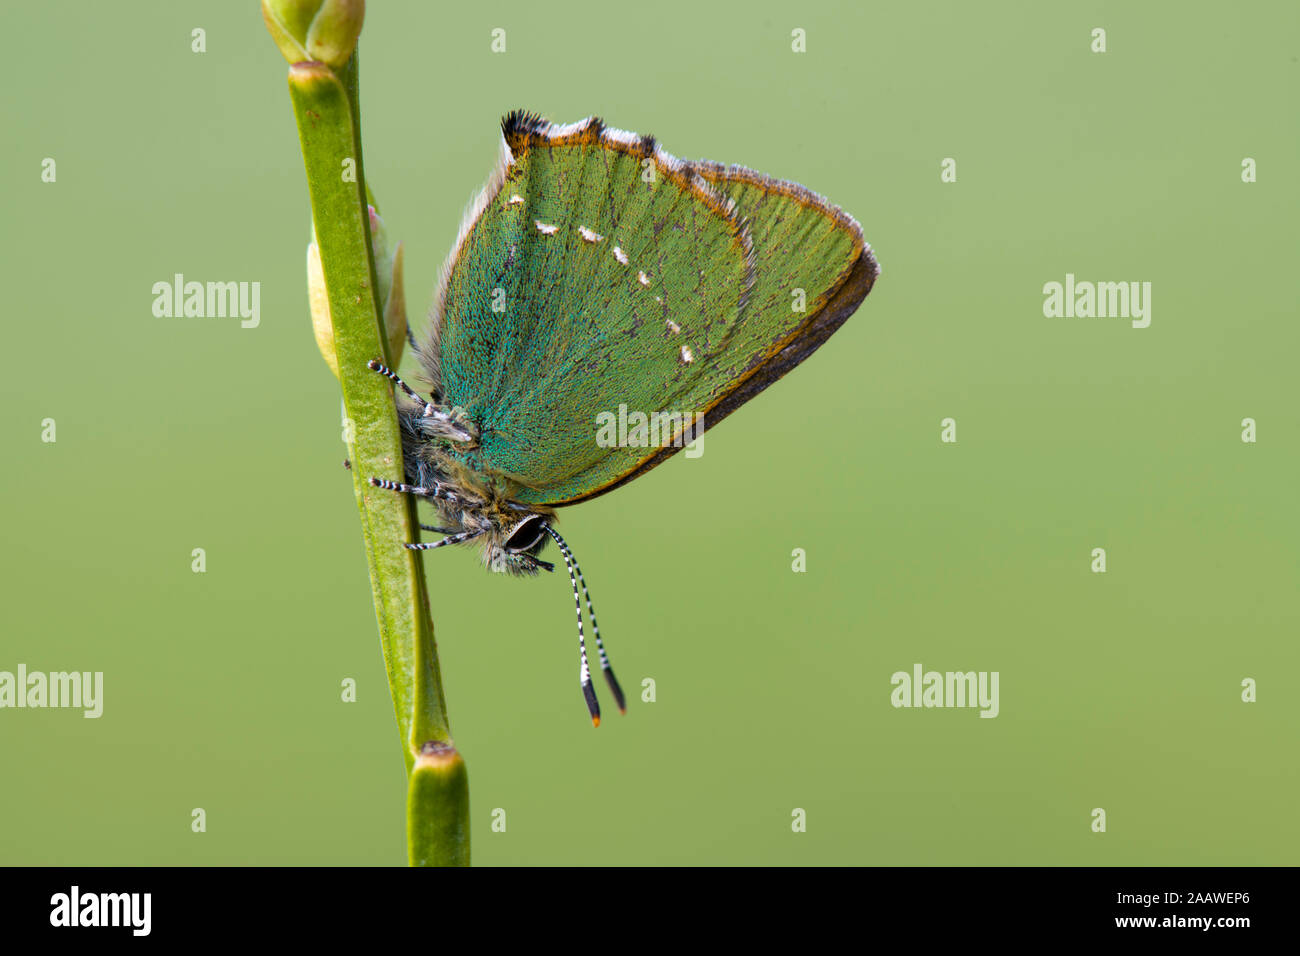 Close-up of green hairstreak butterfly on plant Stock Photo